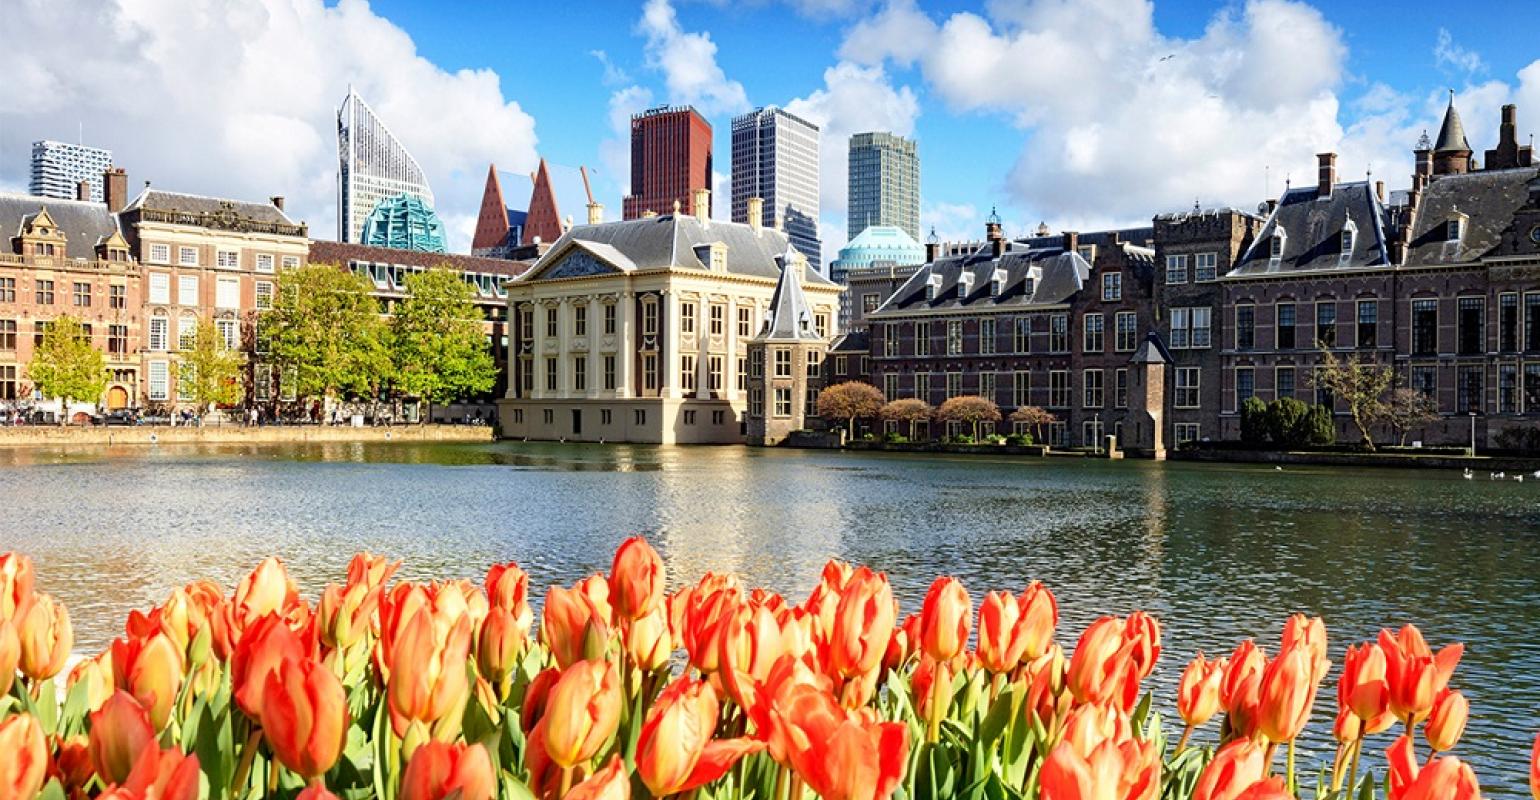 The Hague: The City that Suits All Tastes | MeetingsNet